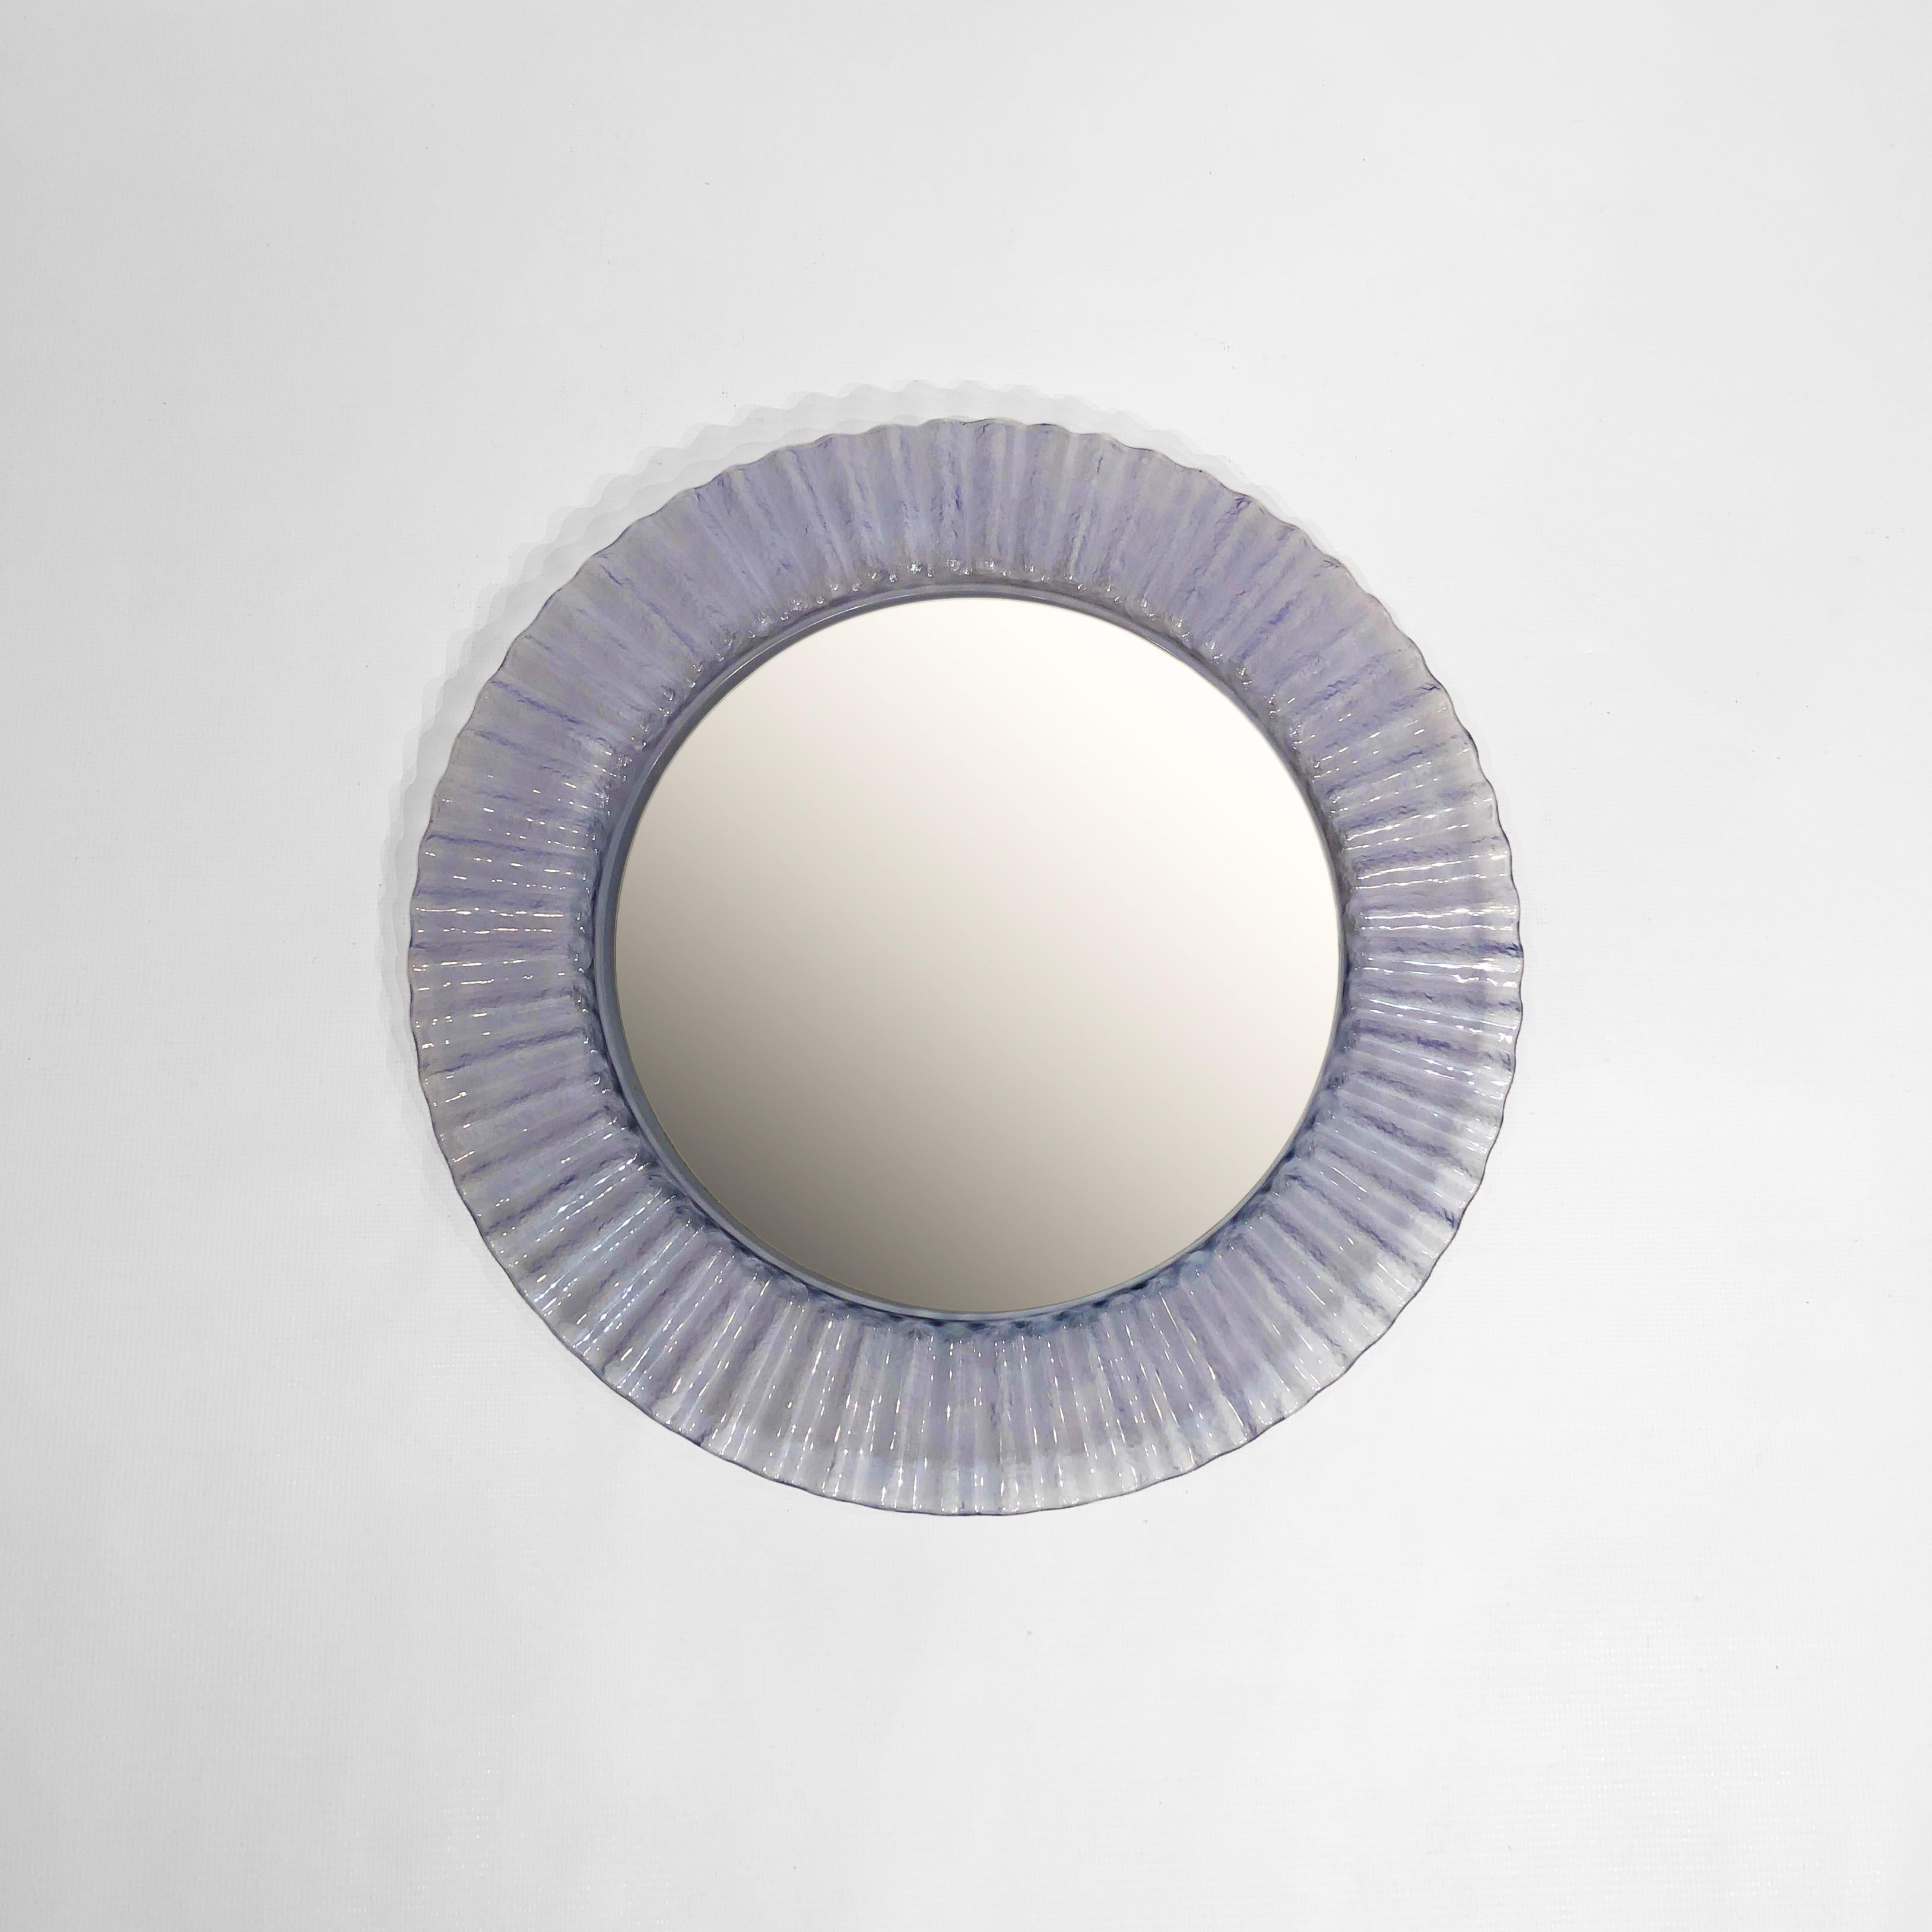 A fantastic 1970s round mirror, with a frame made from crimped acrylic to give the effect of an icy wave. 

The frame of the mirror is crafted from a clear transparent icy blue acrylic giving it a contemporary feel. This frame houses a round pane of